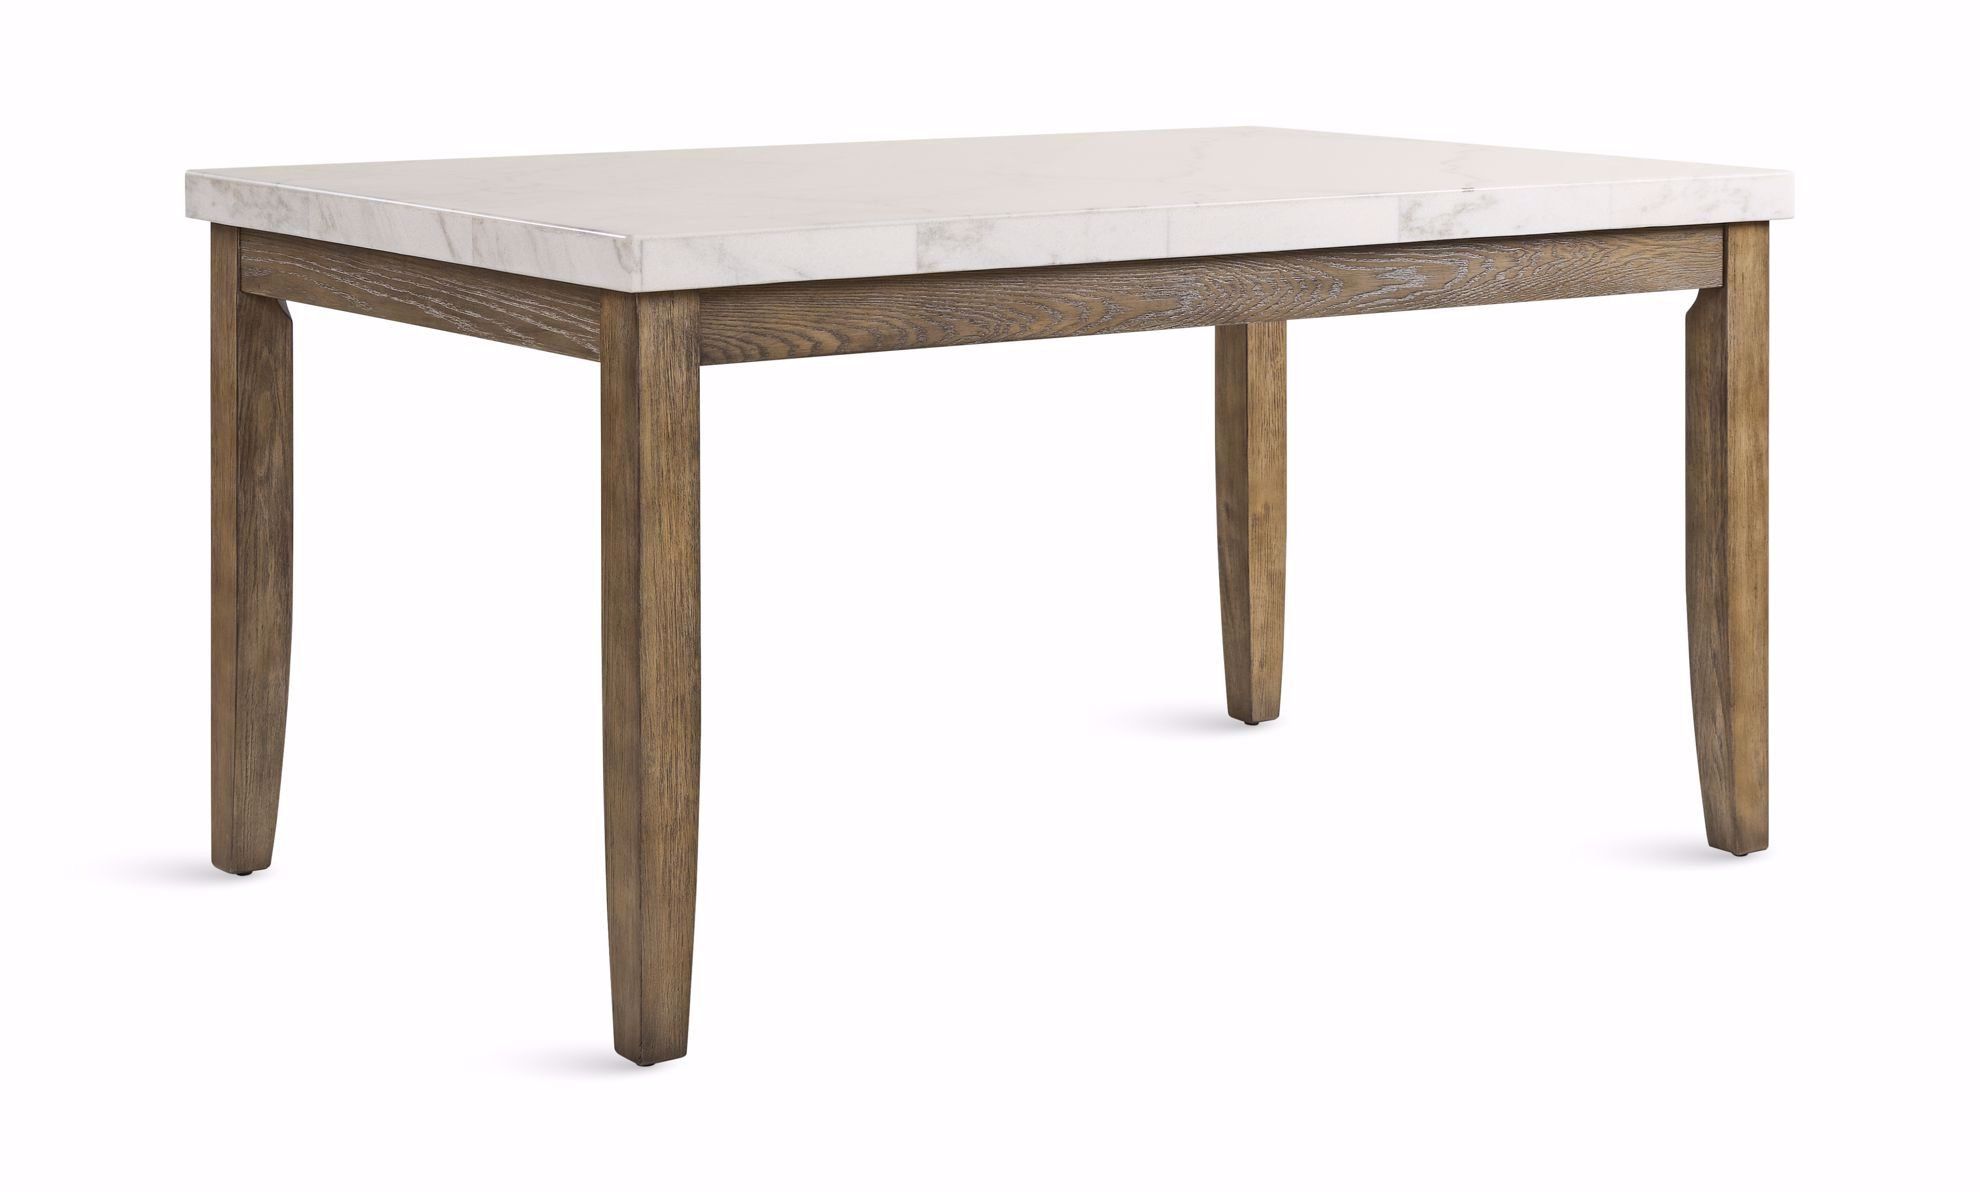 Emily Marble Dining Table